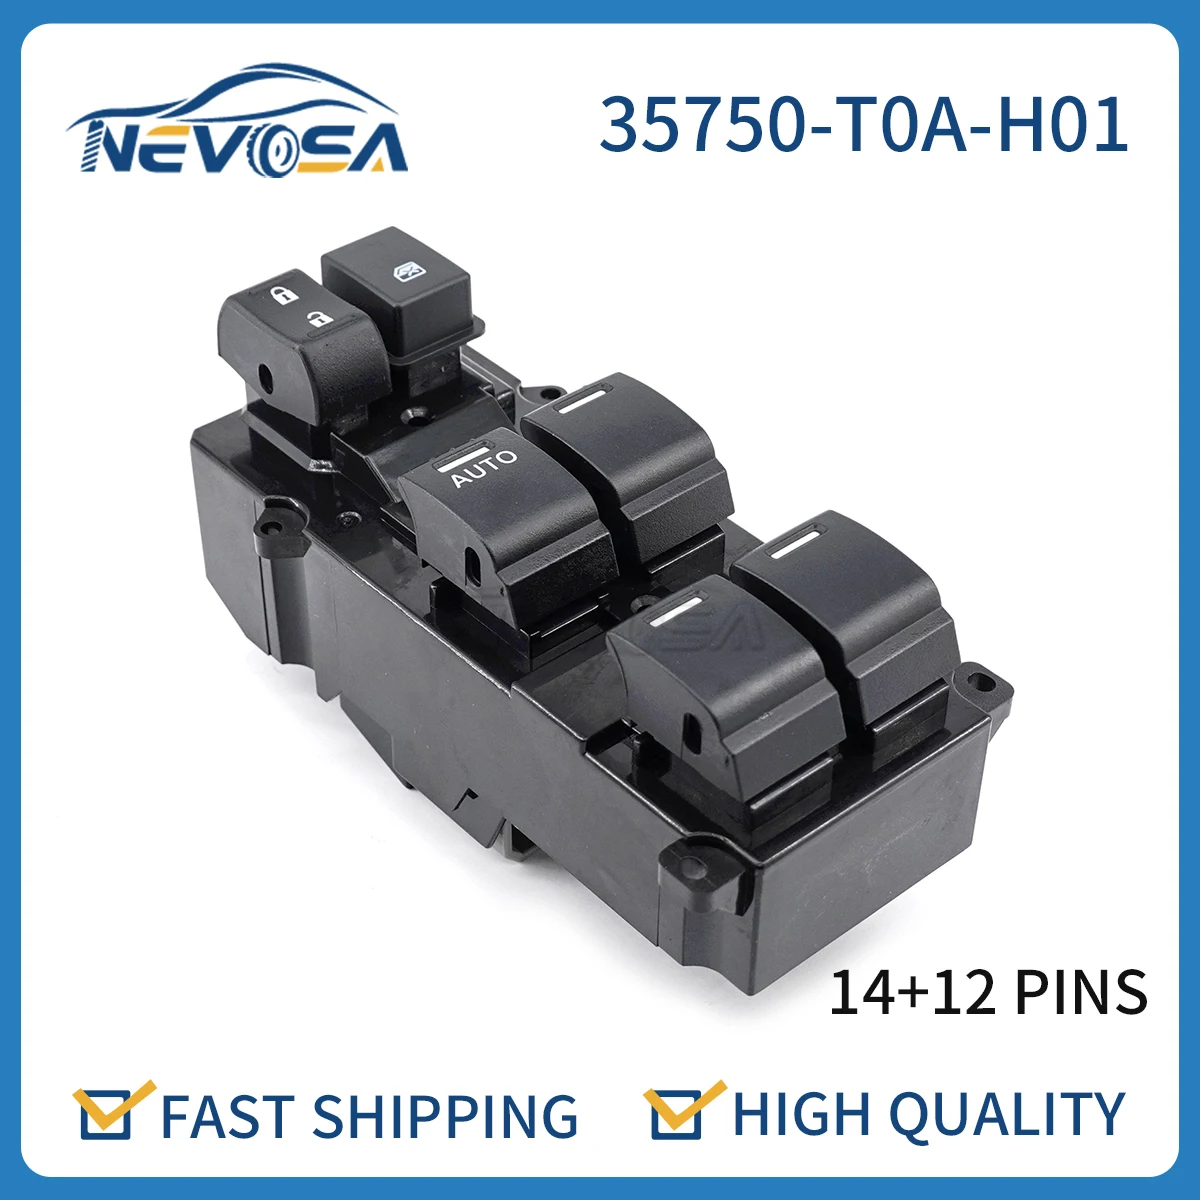 

Nevosa 35750-T0A-H01 Left Front Car Power Electric Window Switch For Honda CR-V CRV CIVIC 2012 2013 35750T0AH01 26Pins